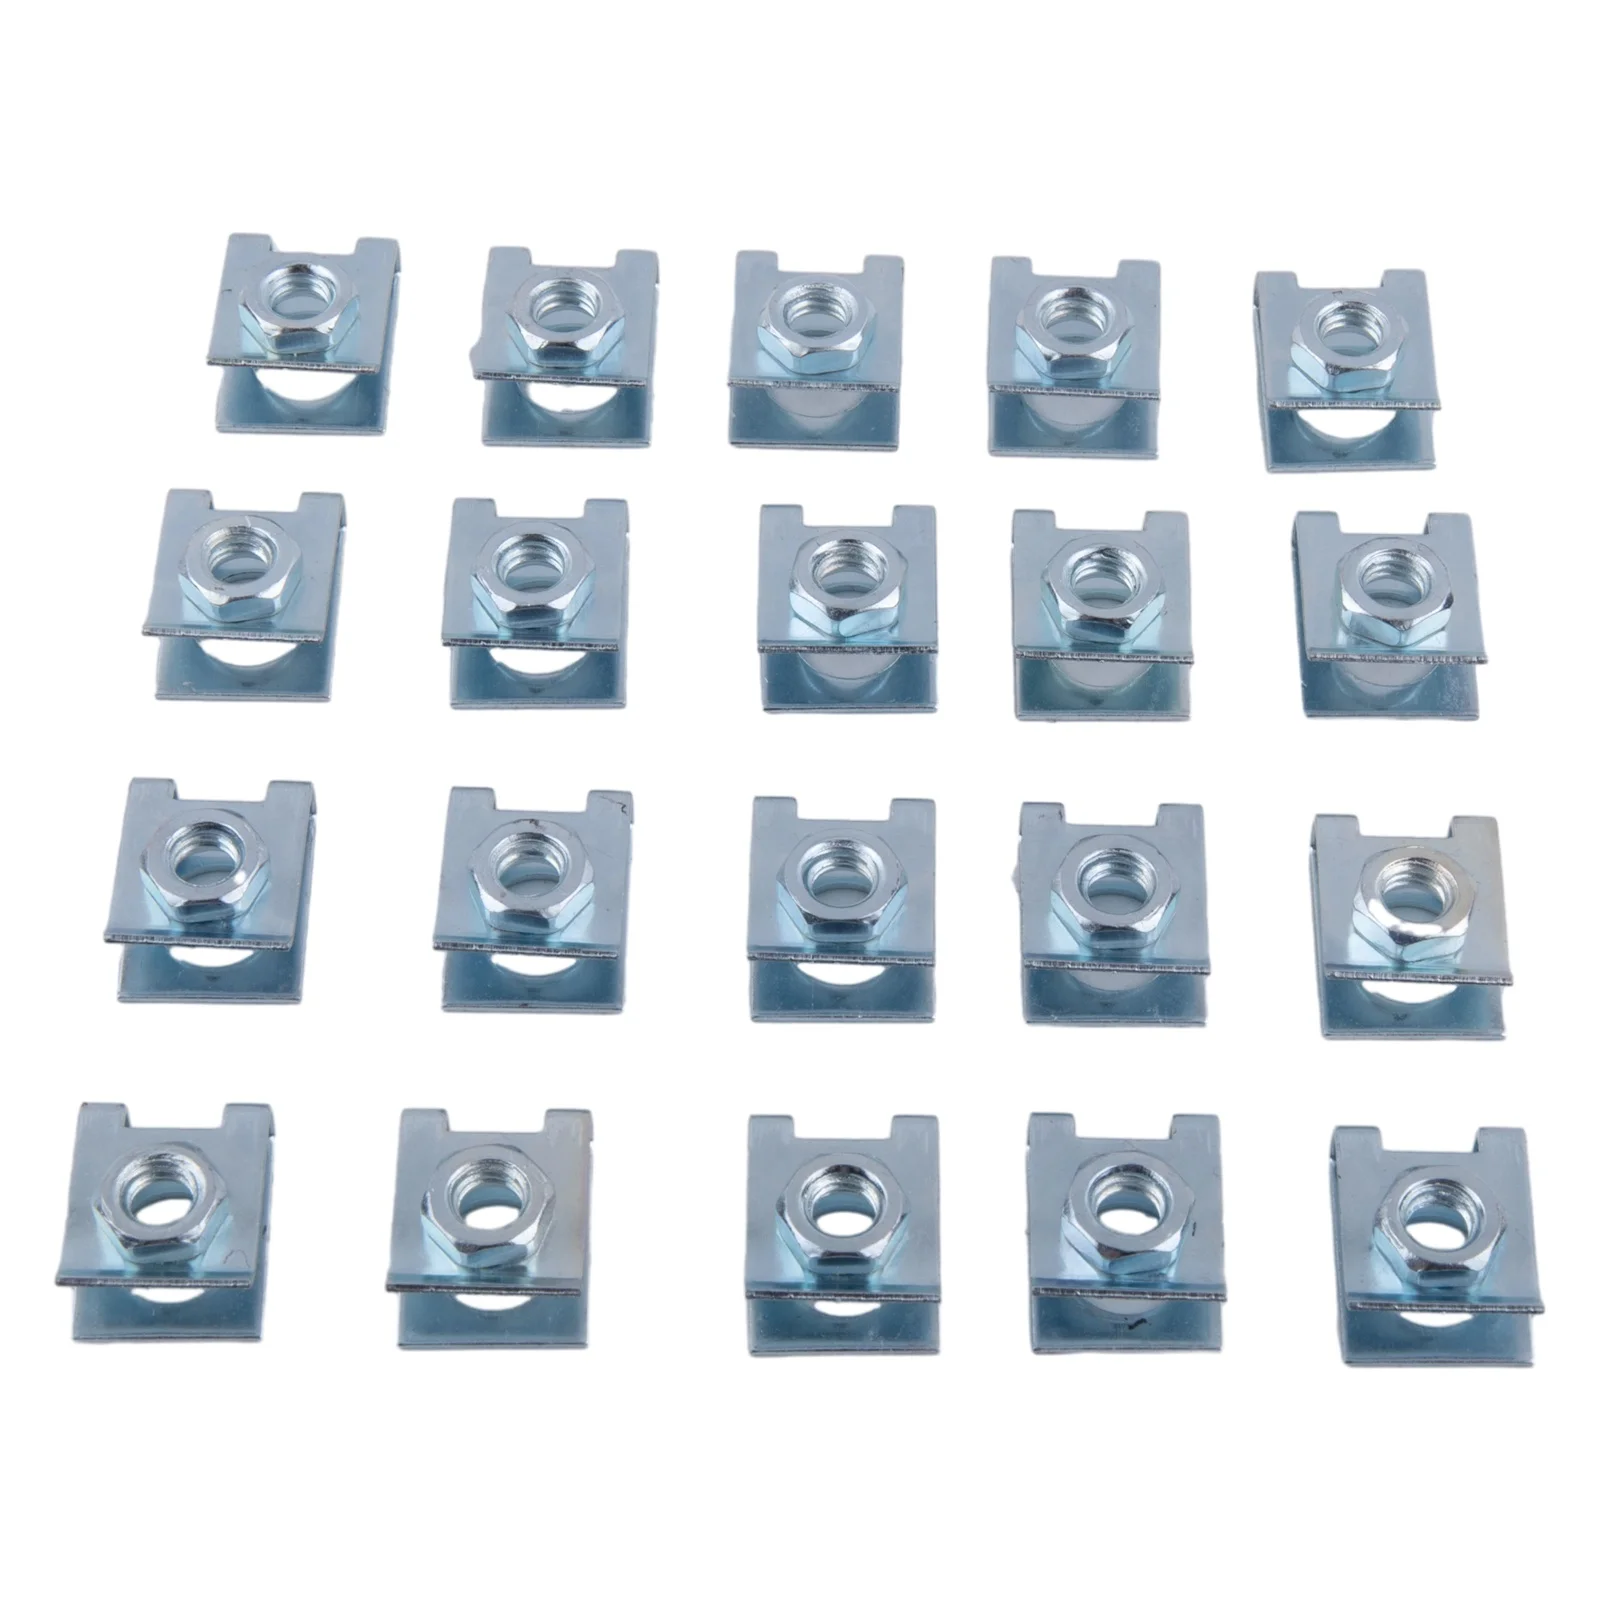 

20pcs Car License Plate Fixed 6mm Clip Retainers Fasteners Buckle M6 Nut U-Type Clip Silver Replacement Useful